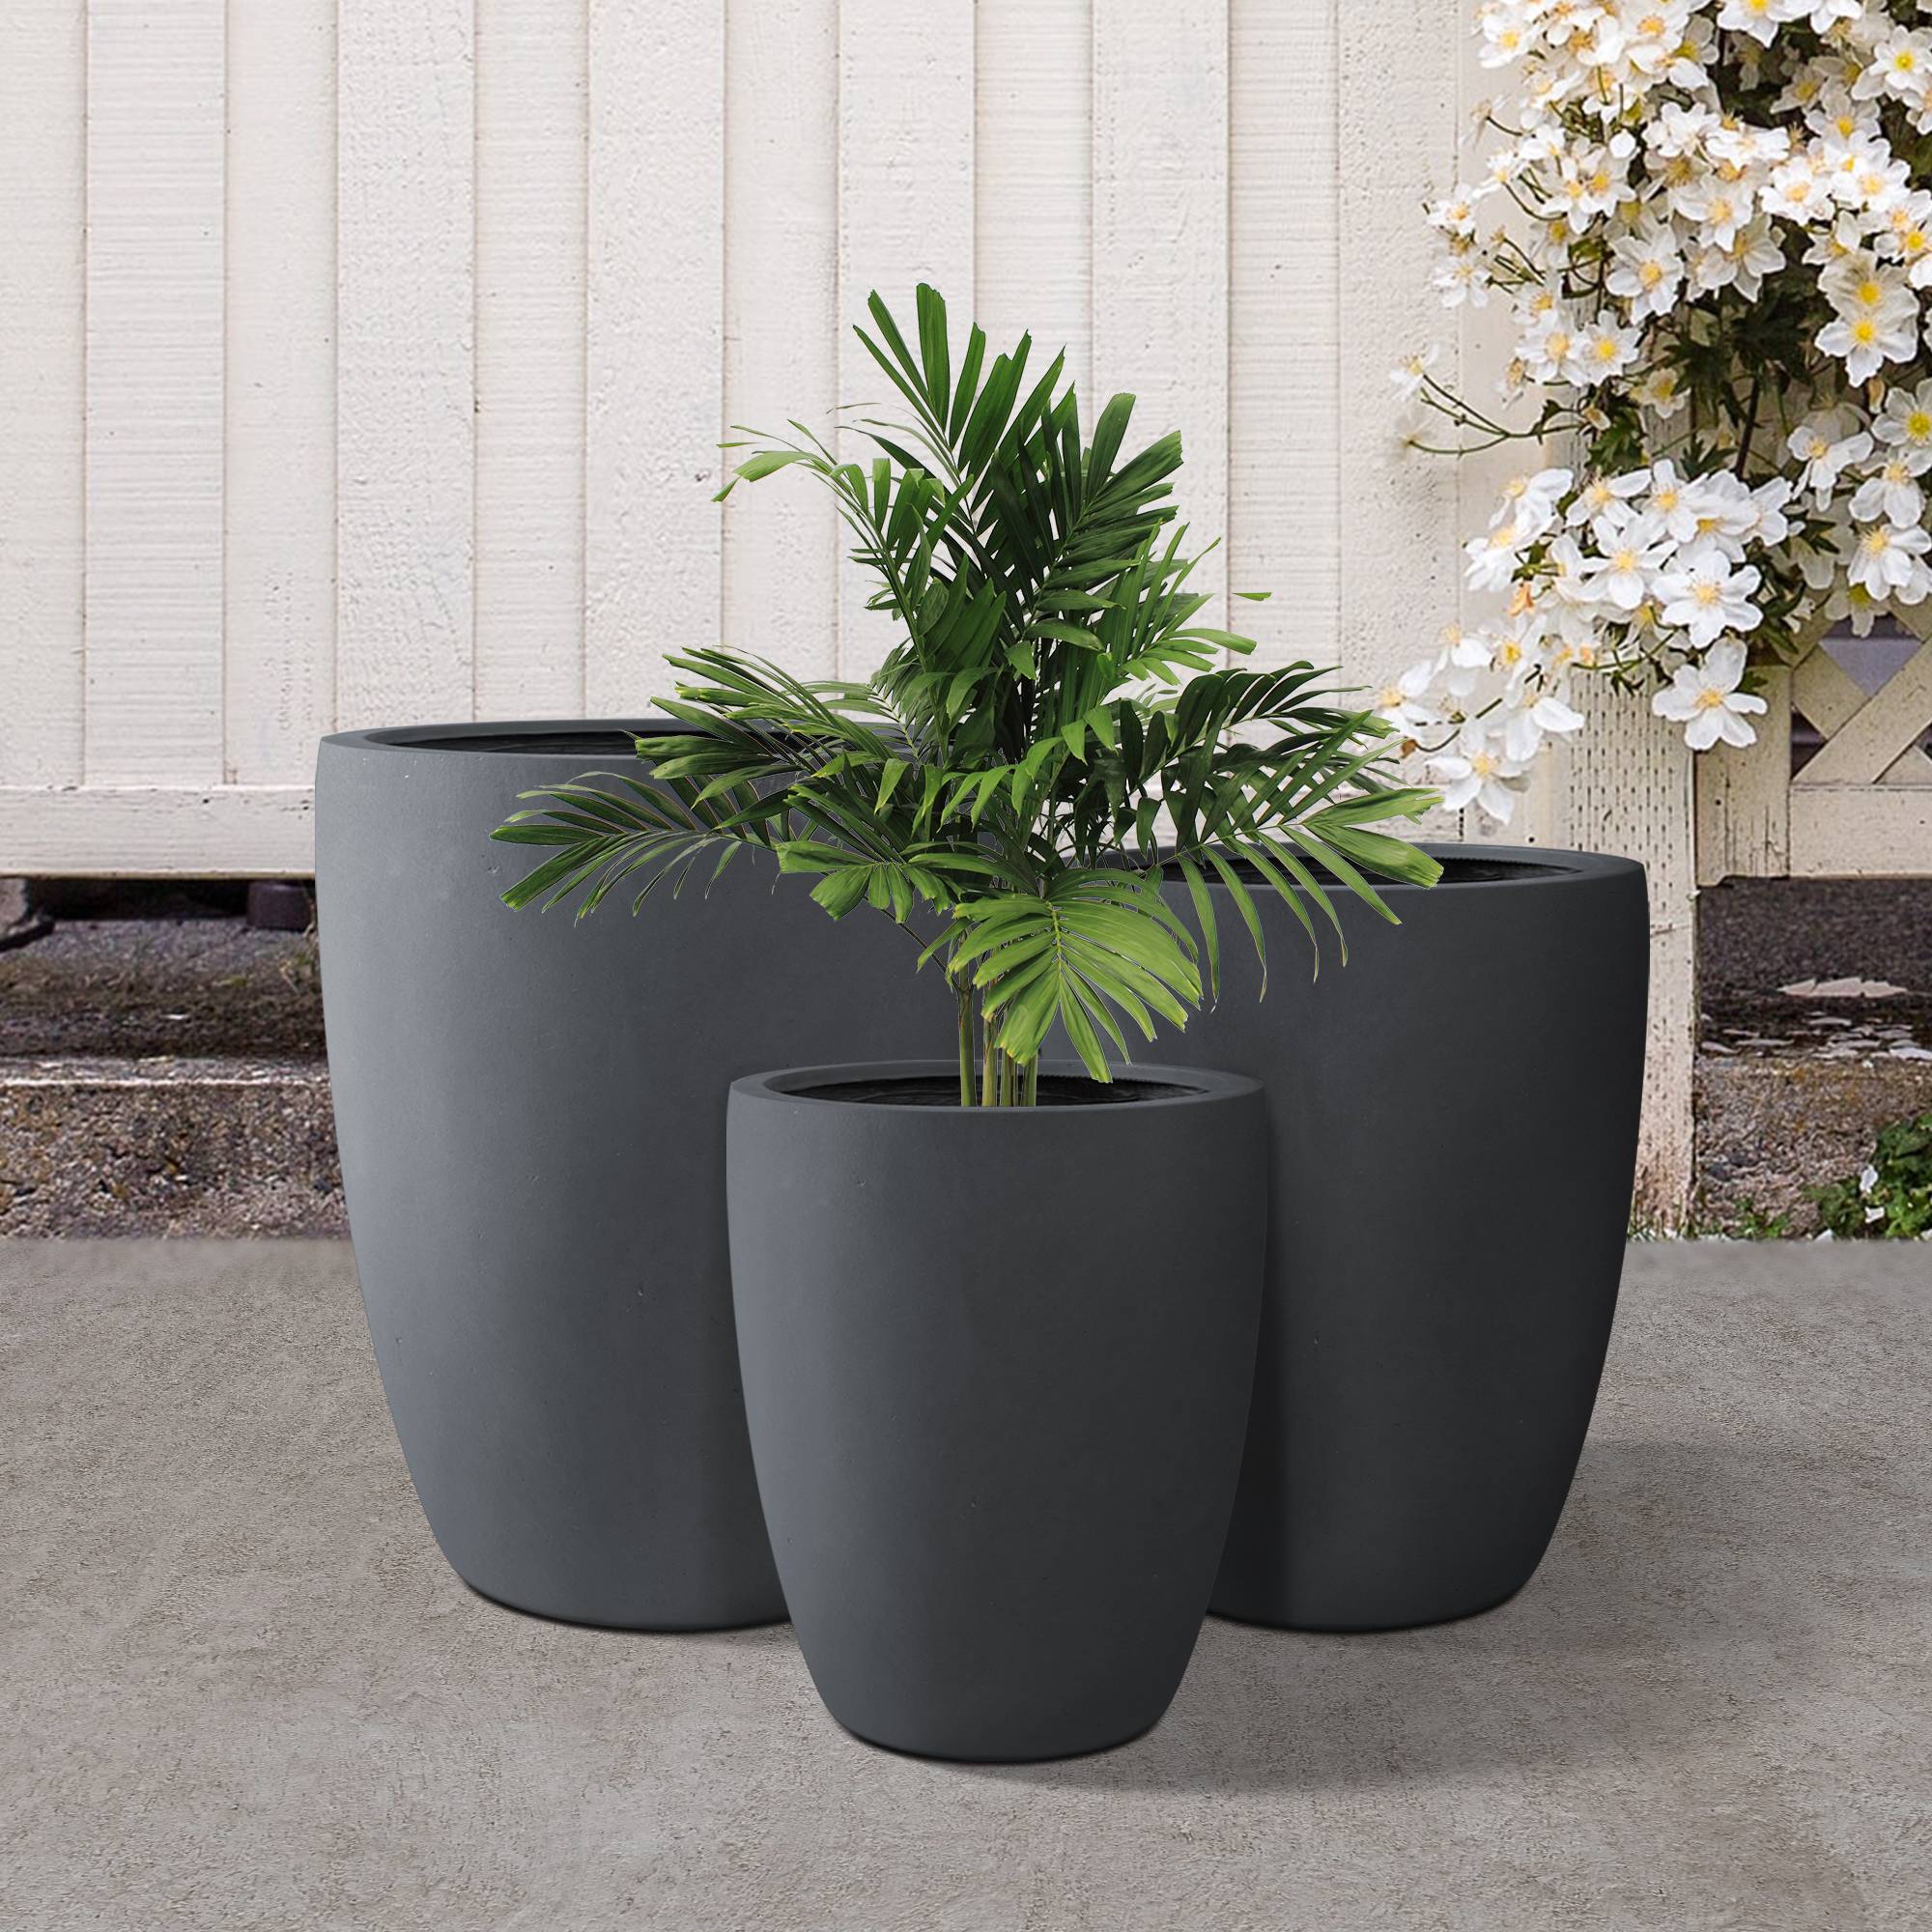 Kante 21.7 H Weathered Concrete Tall Planter, Large Outdoor Indoor  Decorative Pot with Drainage Hole and Rubber Plug, Modern Round Style for  Home and